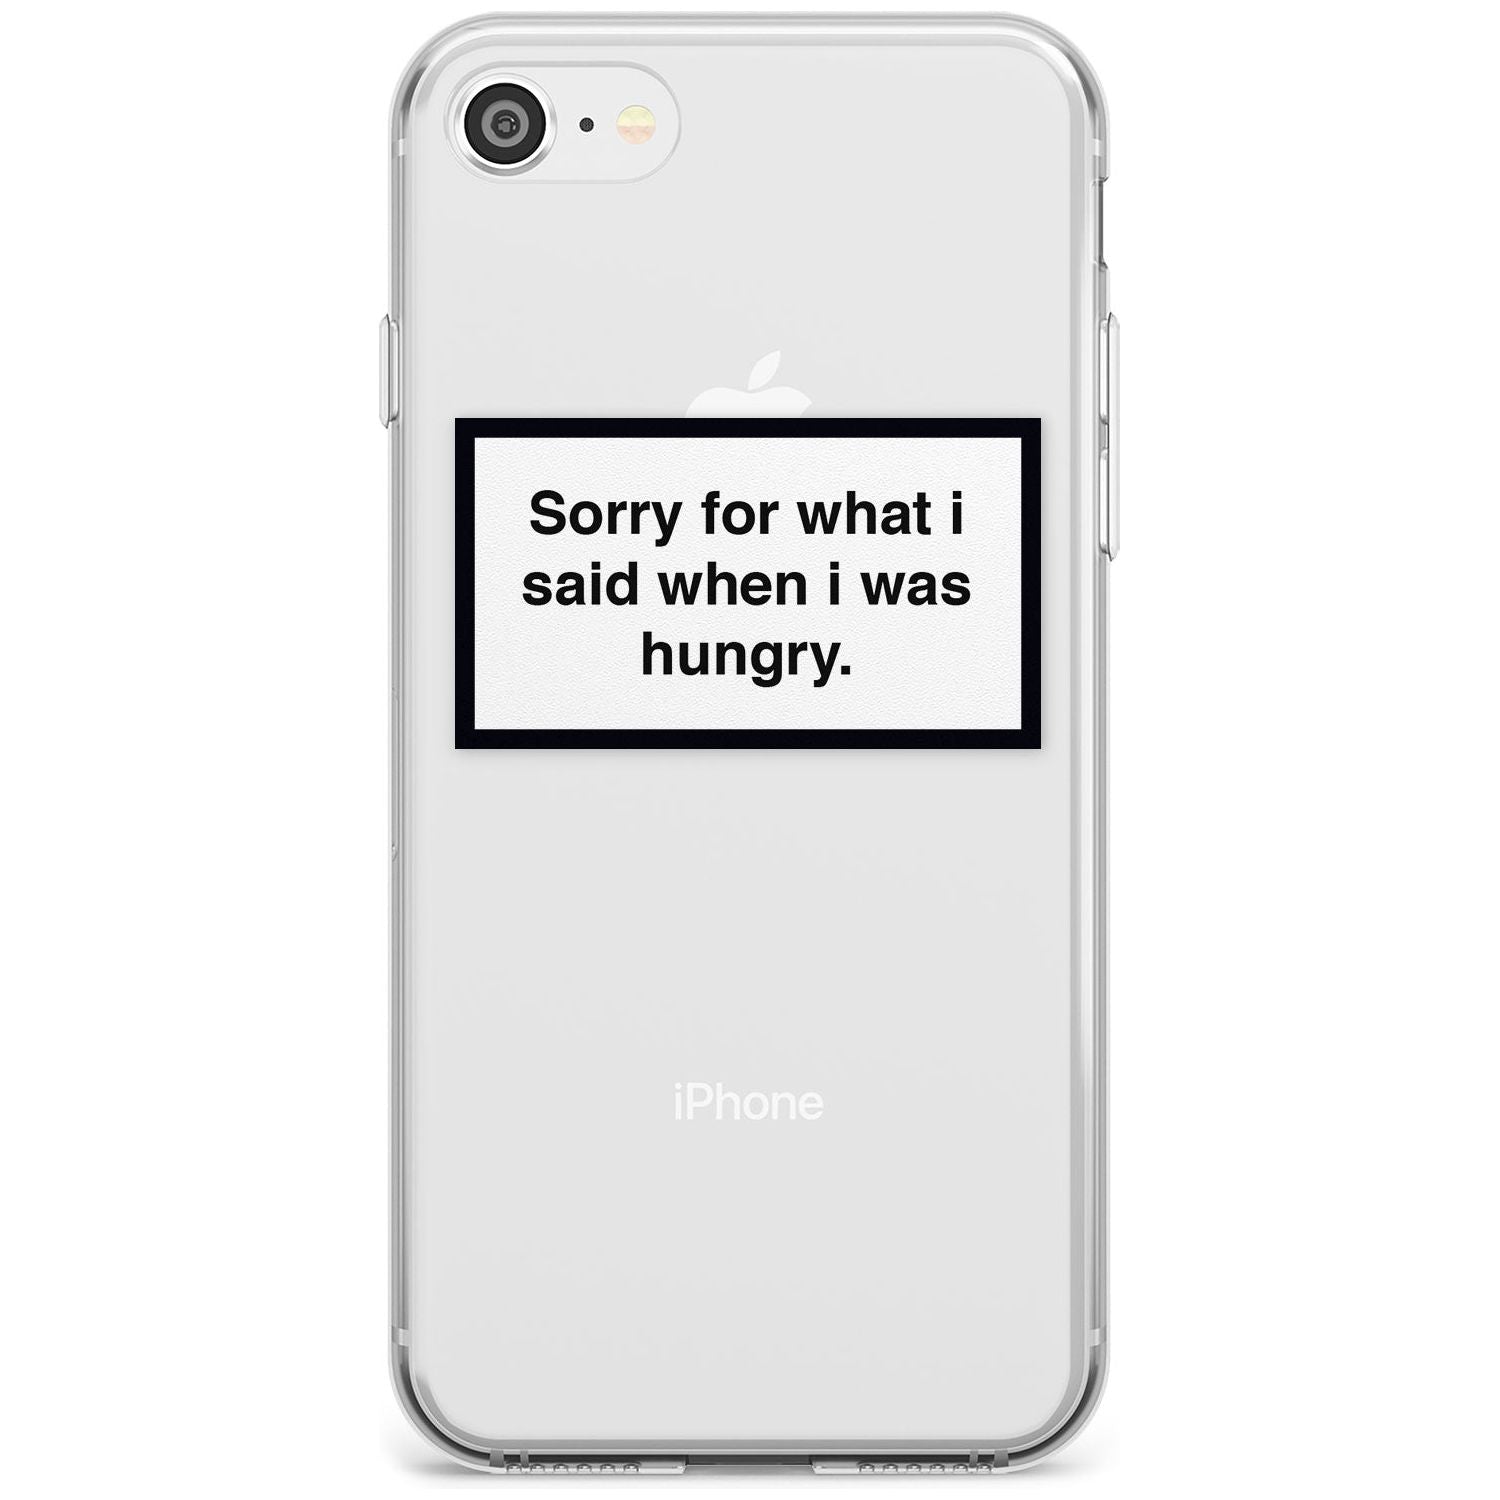 Sorry for what I said iPhone Case  Slim Case Phone Case - Case Warehouse